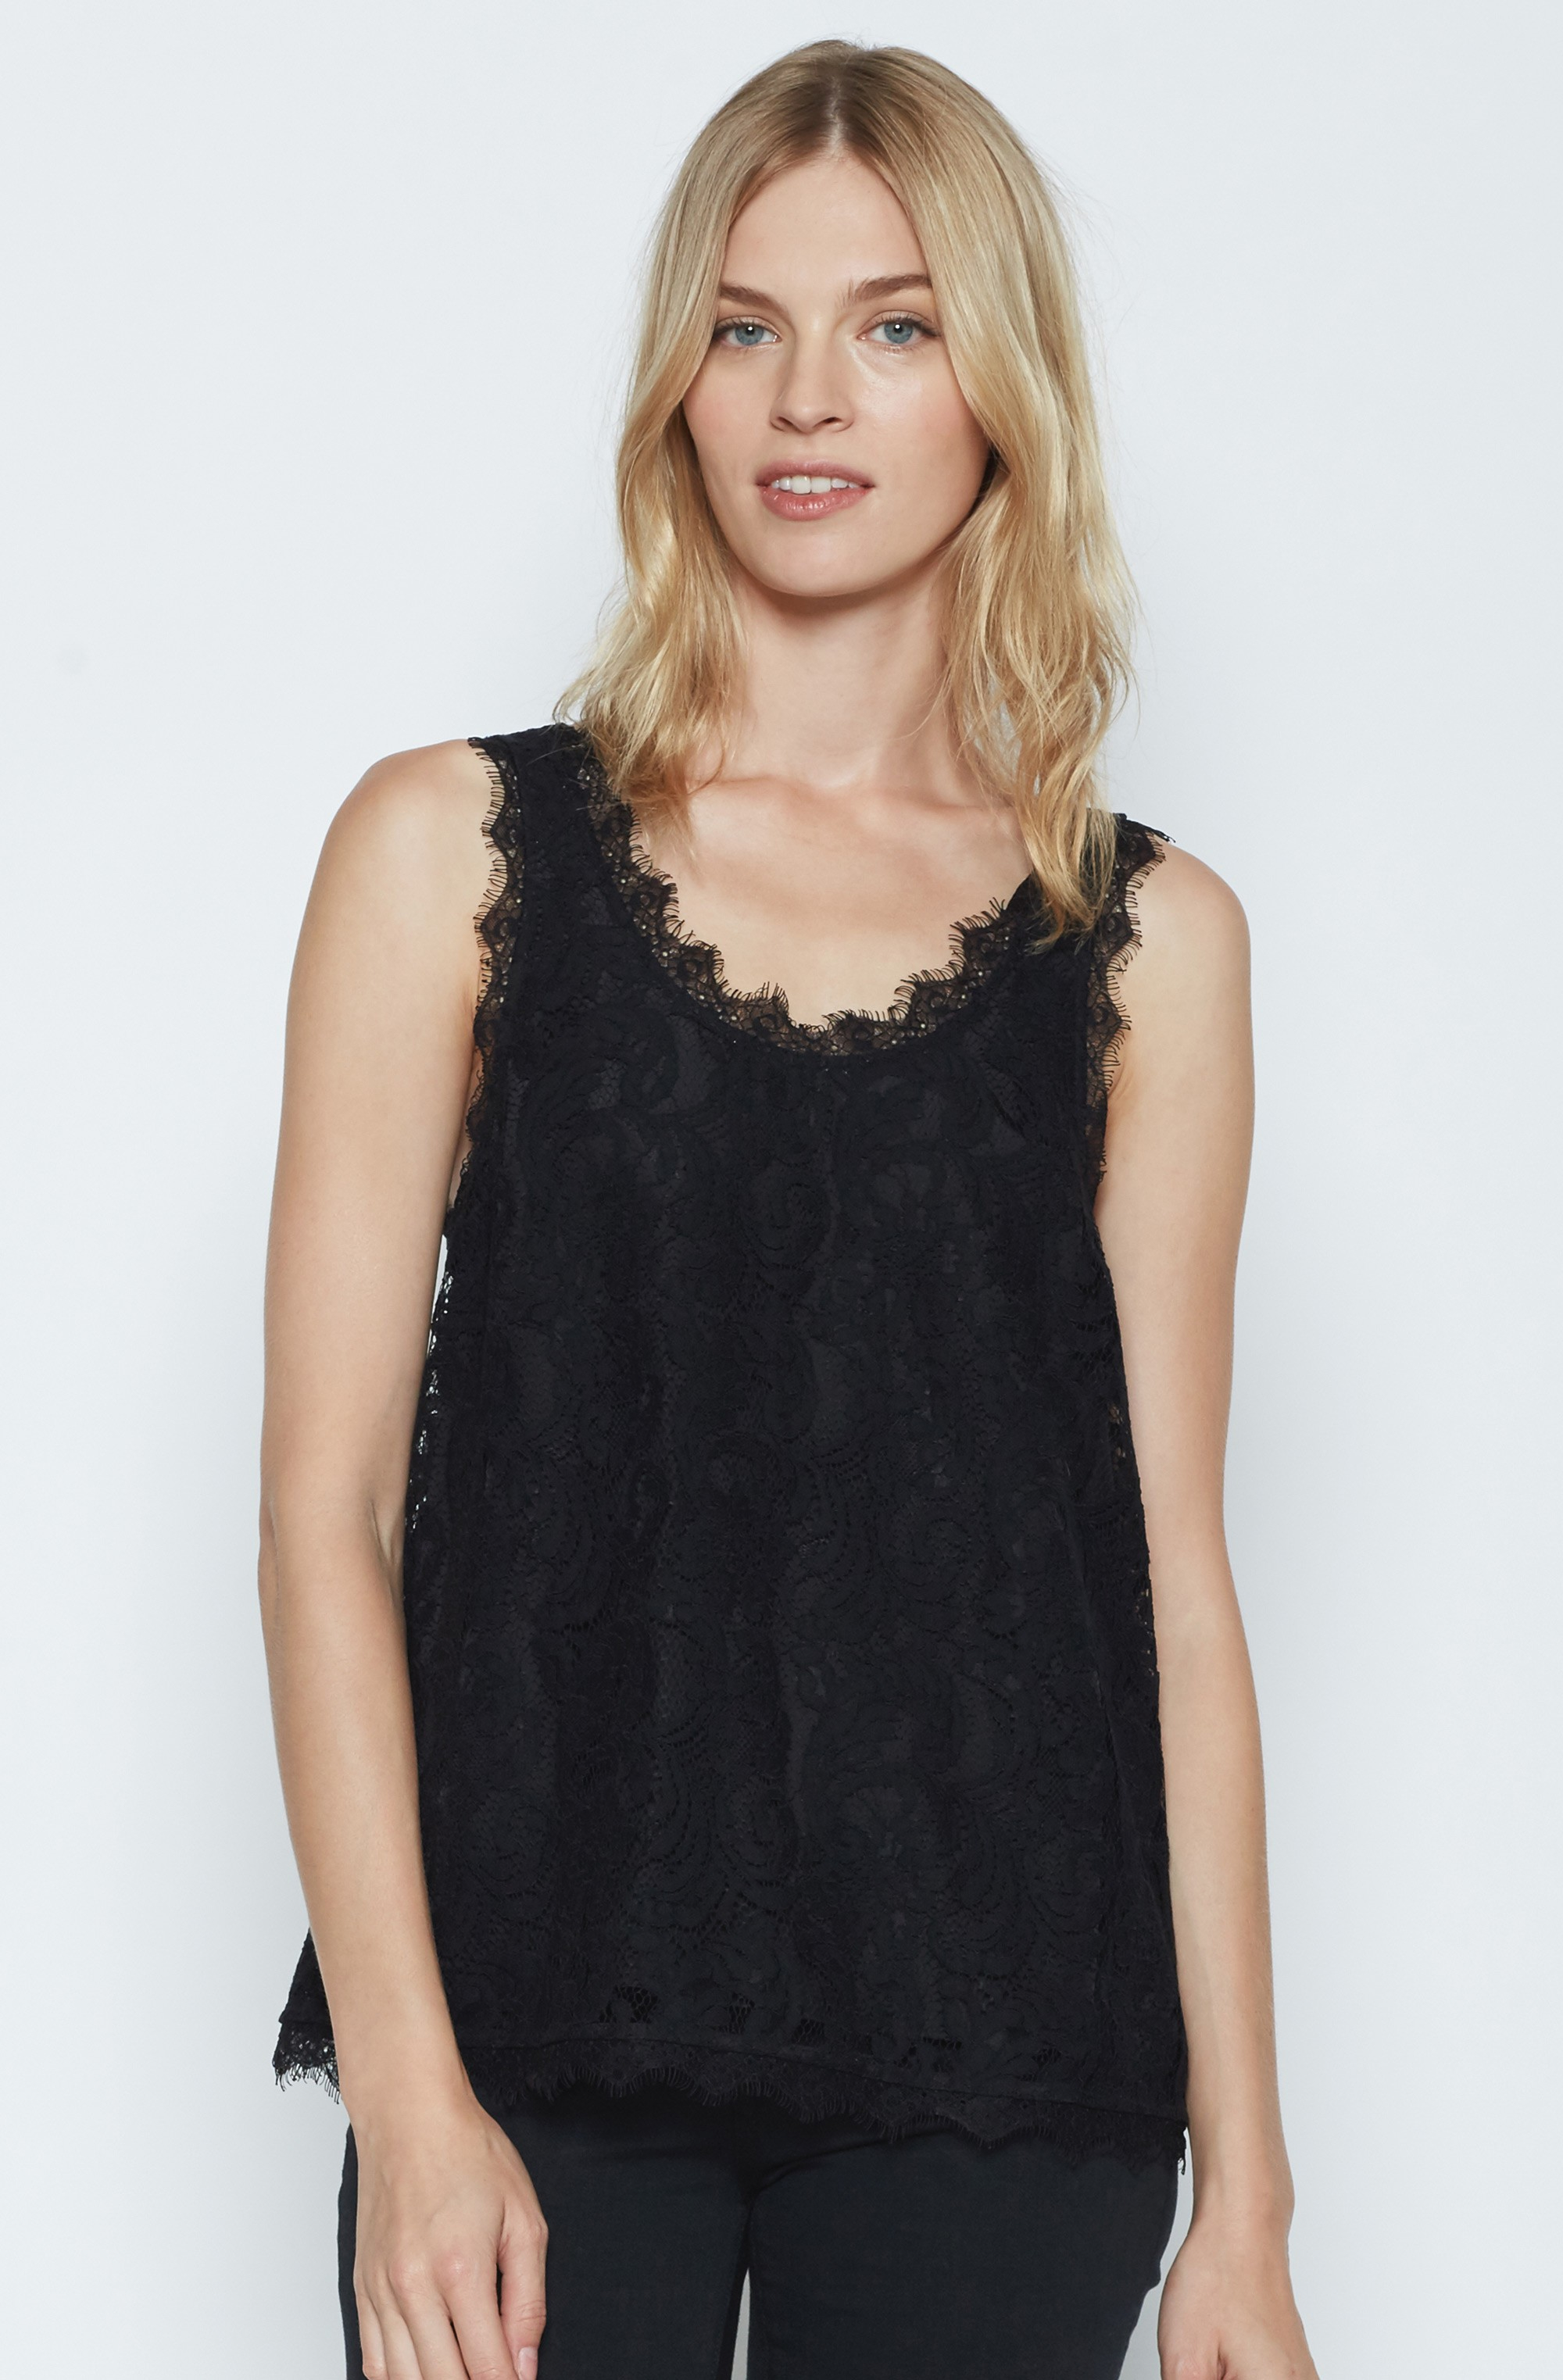 Joie Brinx Lace Top in Black - Lyst